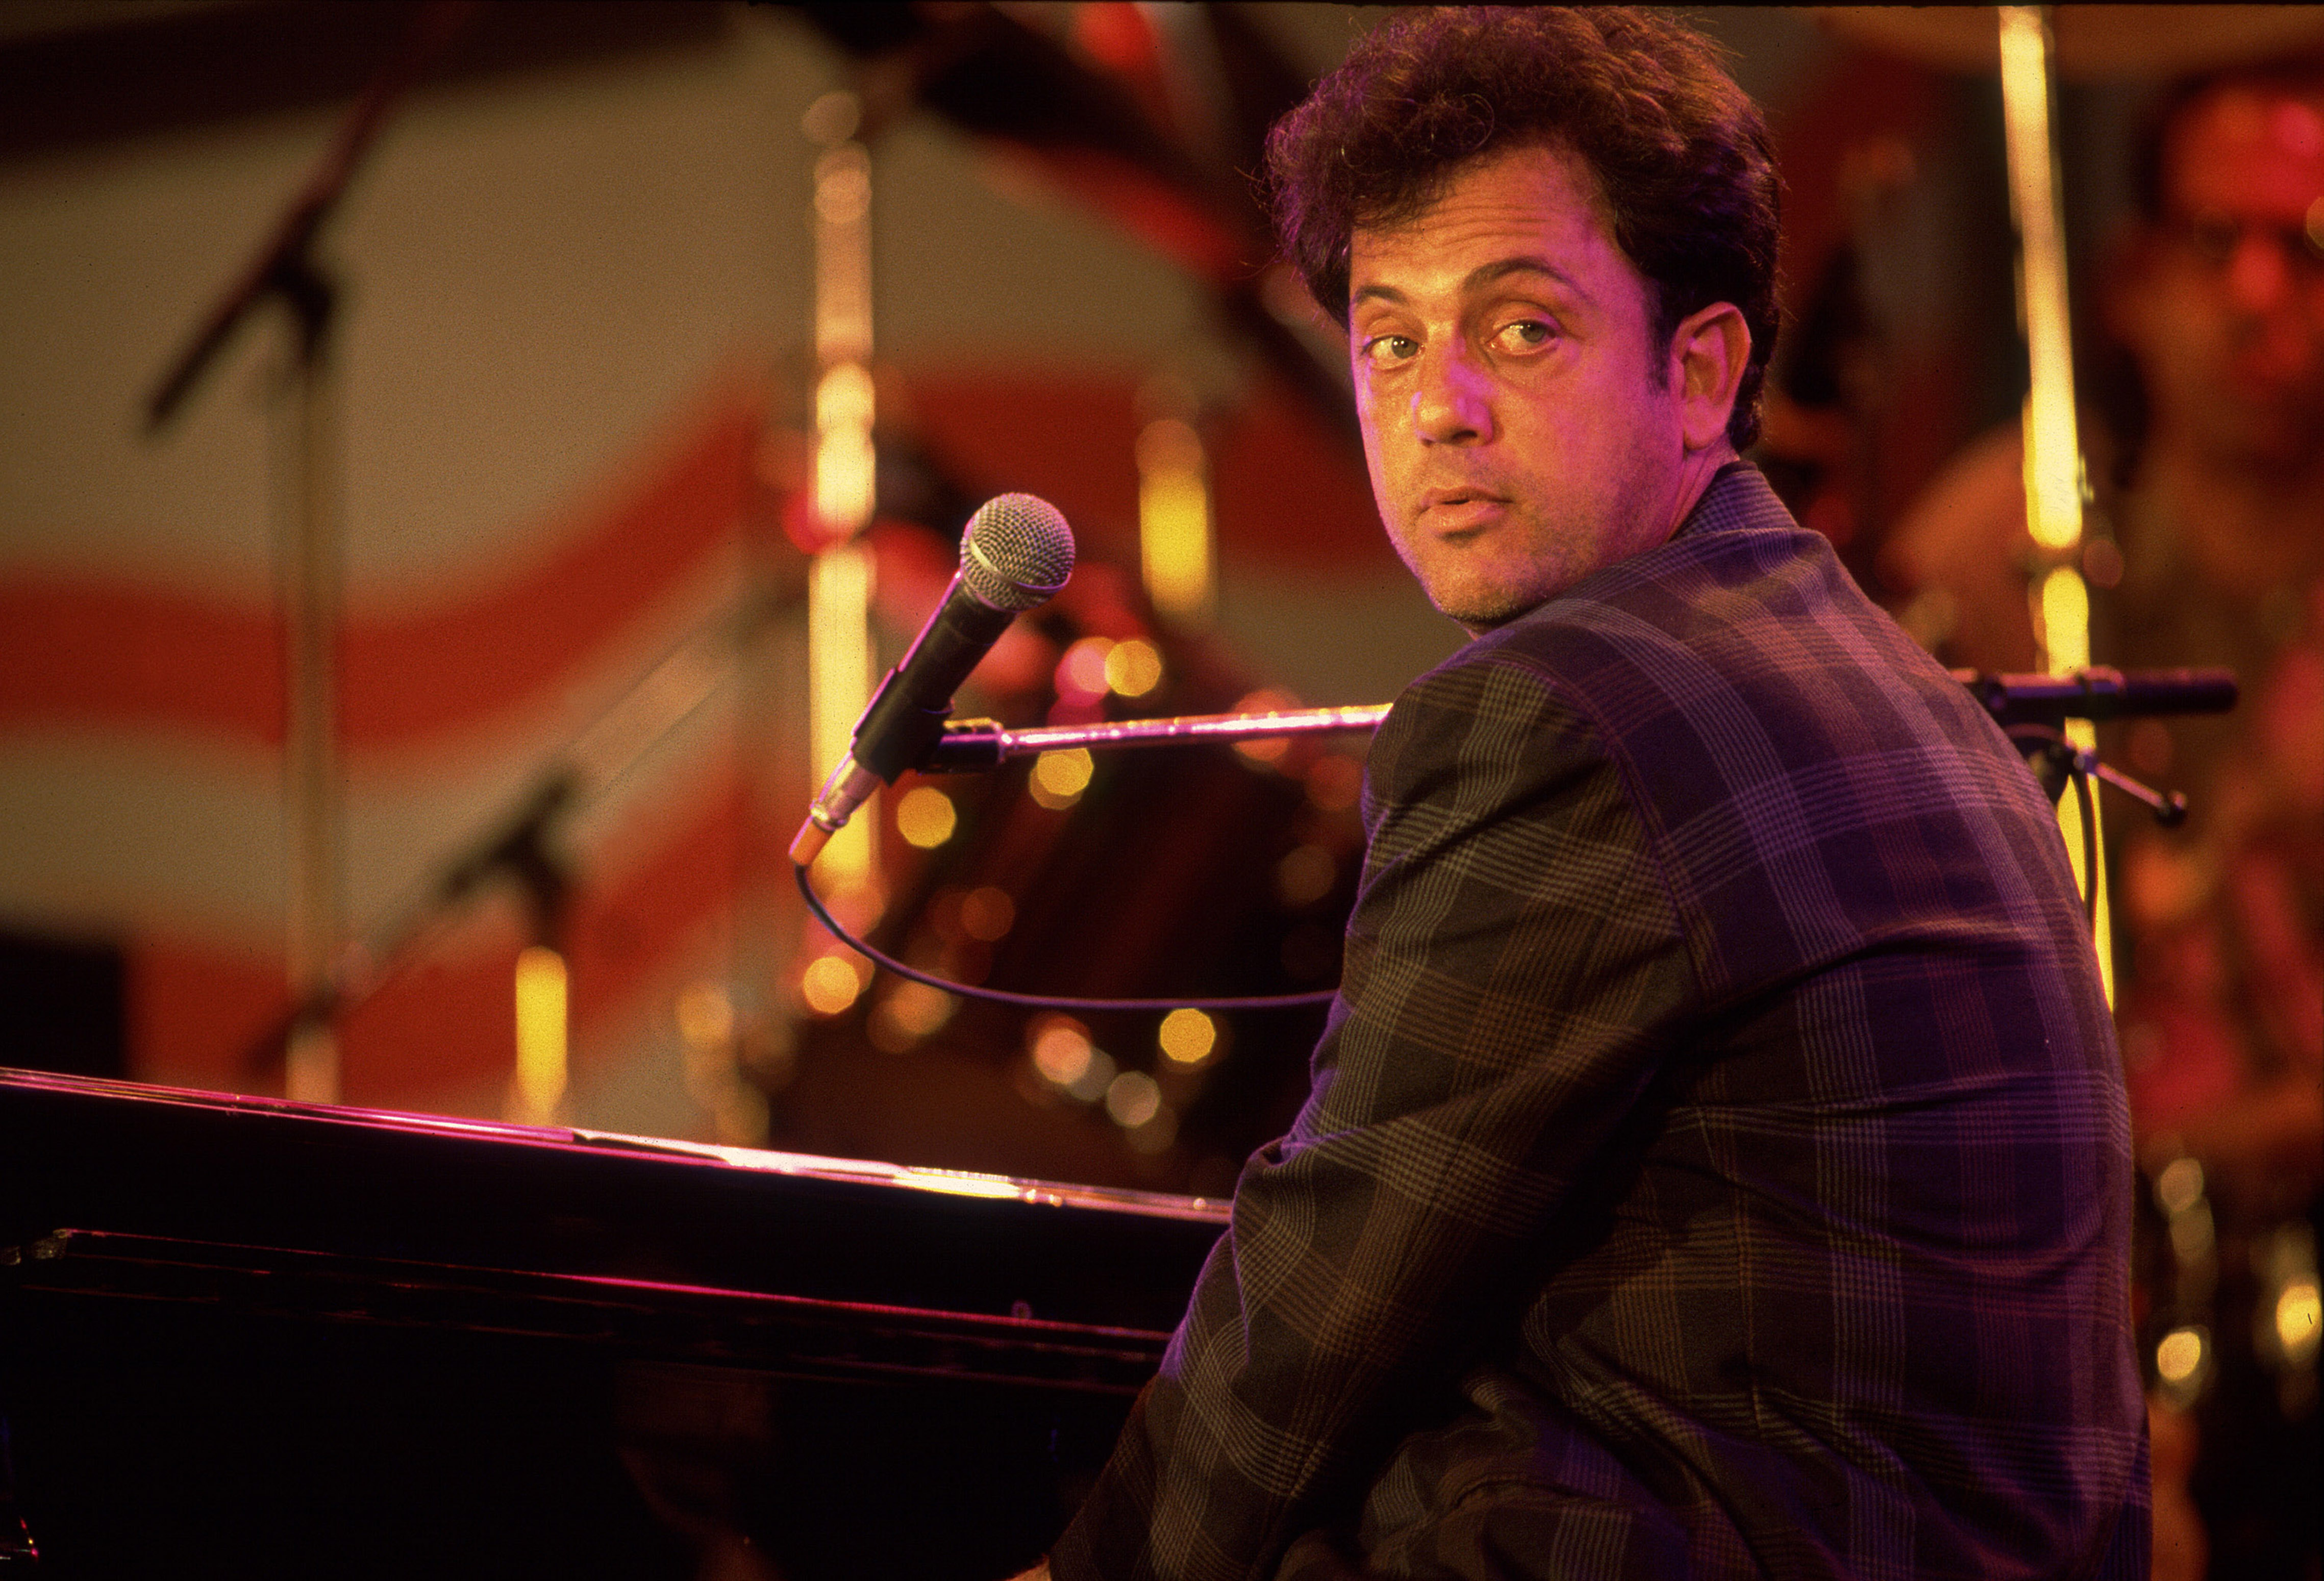 Billy Joel performs during the first Farm Aid benefit concert in Champaign, Illinois on September 22, 1985 | Source: Getty Images